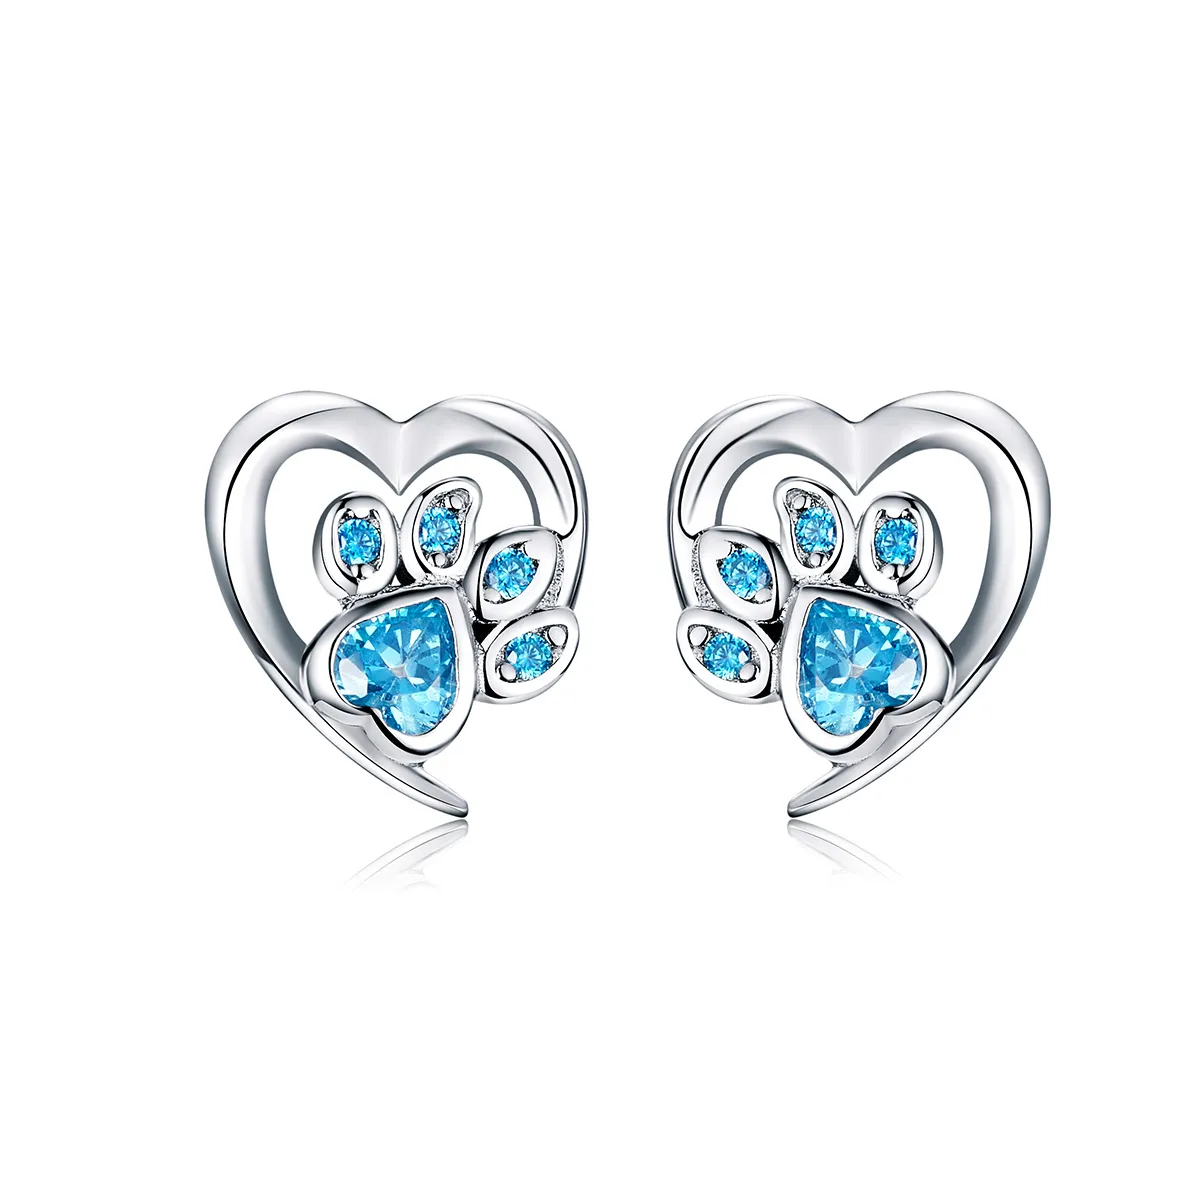 Pandora Style Silver Caring Dog Paw Heart Stud Earrings - SCE654